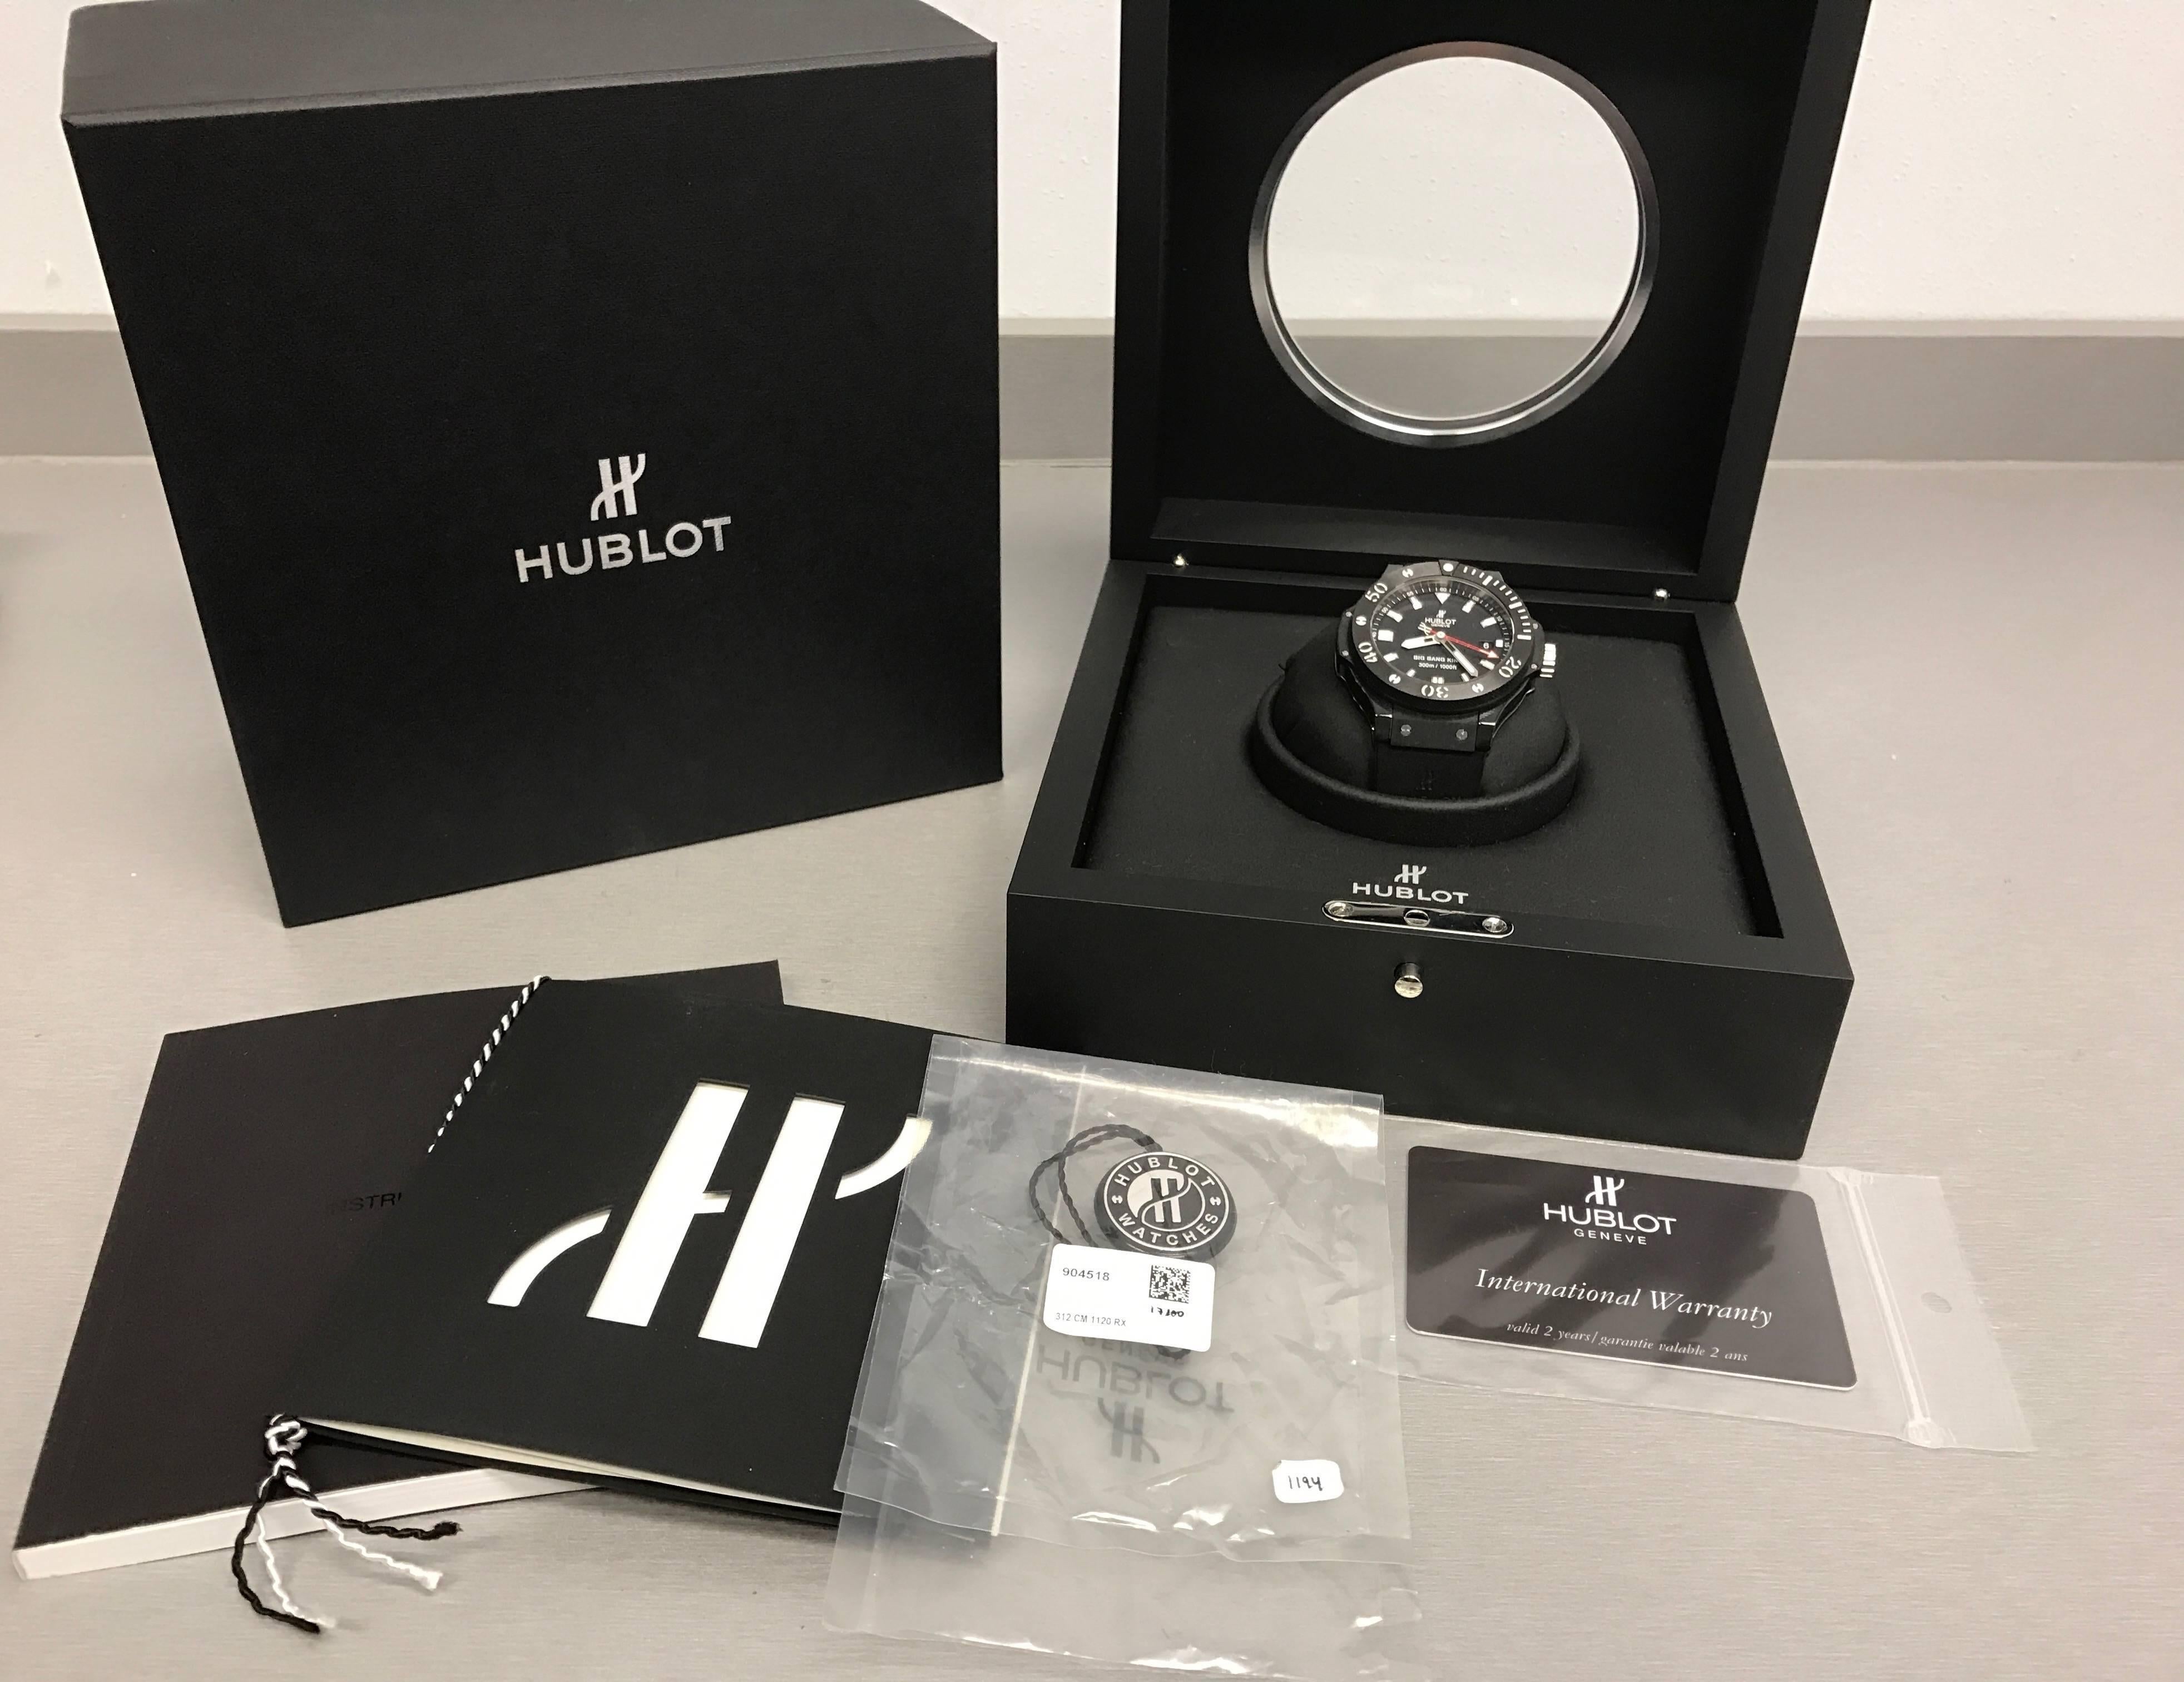 Manufacturer: Hublot
Model Name: Big Bang King
Model Number: 312.CM.1120.RX
Gender: Mens
Movement: Automatic Winding with Date
Movement Details: Black Magic. Hublot HUB 1400 Automatic Winding Movement
Case: Black ceramic & Stainless Steel case with